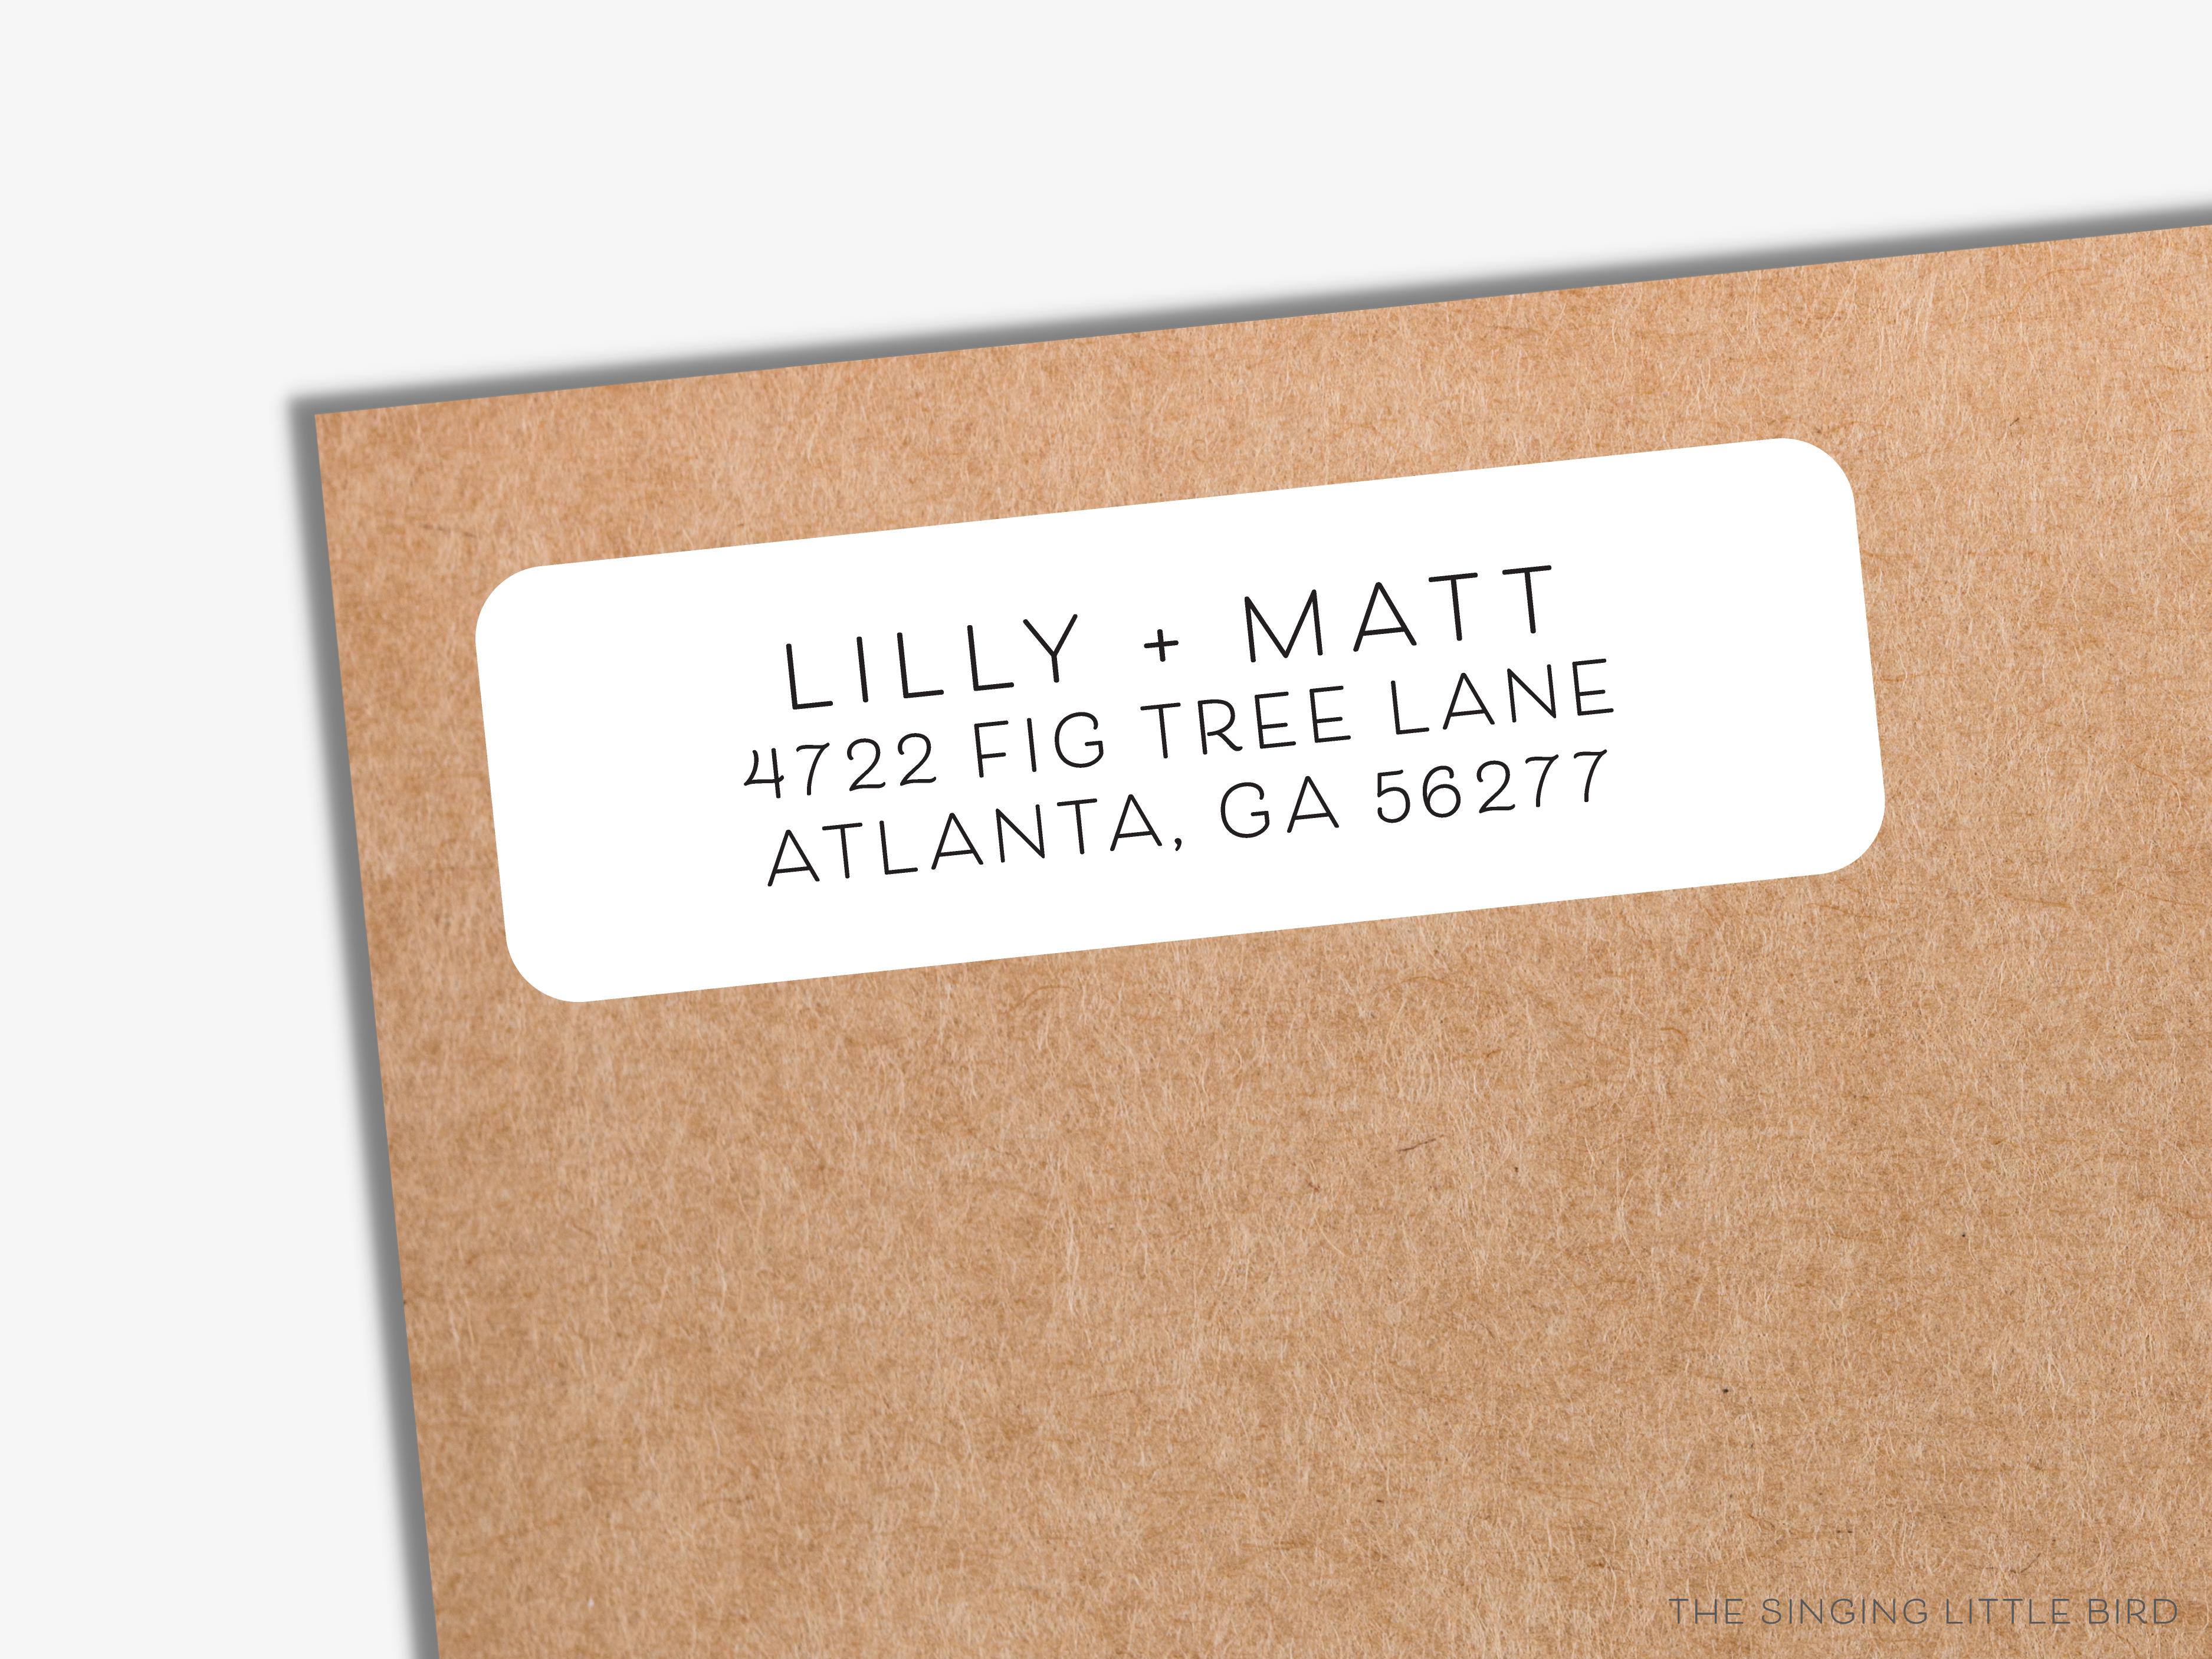 Minimalist Return Address Labels- These personalized return address labels are 2.625" x 1" and feature our simple text, printed in the USA on beautiful matte finish labels. These make great gifts for yourself or the modern lover. -The Singing Little Bird